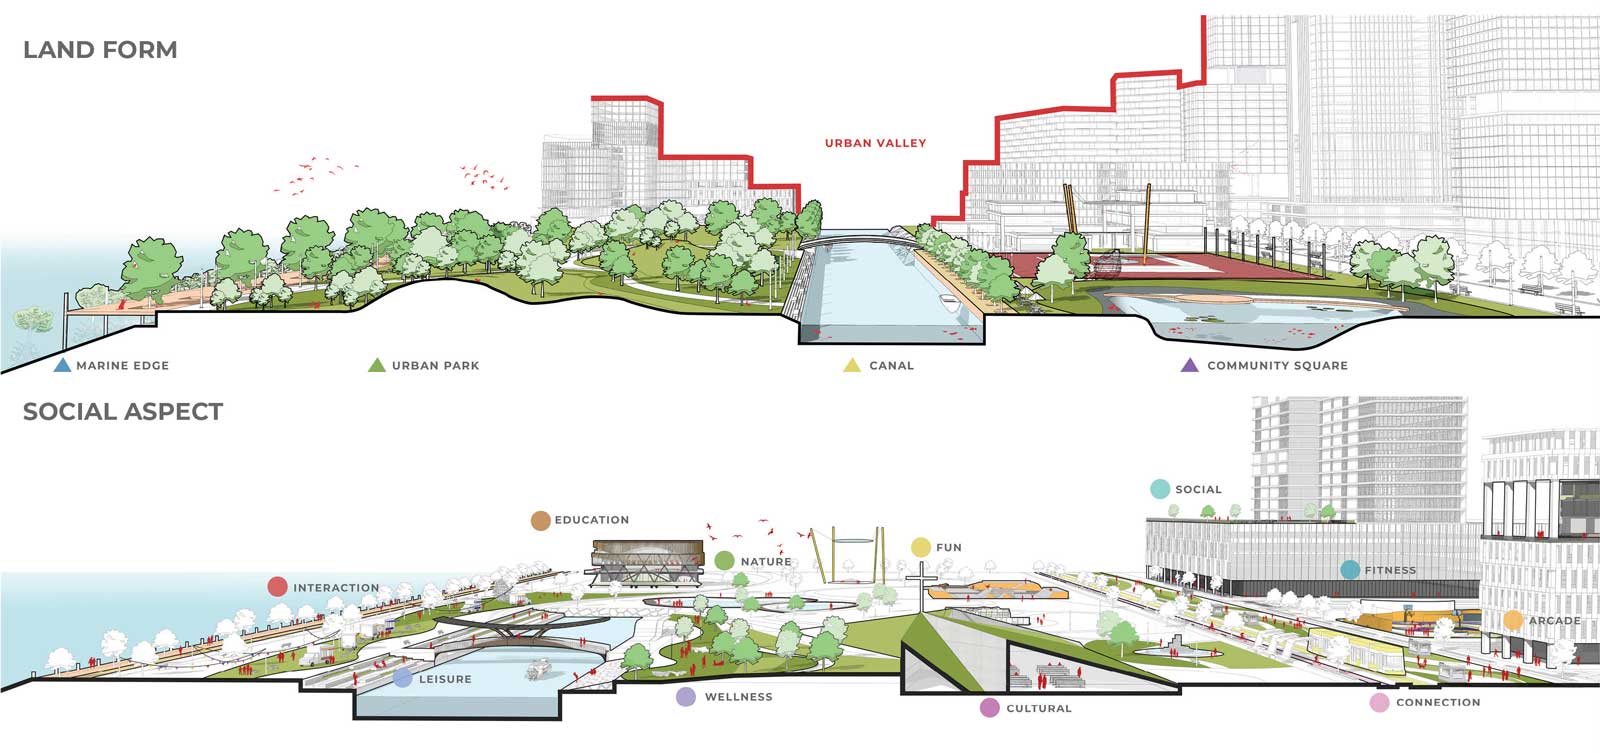 Horizon Manila is a reclamation project in Manila Bay. This illustration shows the site seciton focusing on the land form and social spaces in the master plan development. The central canal park becomes the main highlight of the Manileño concept. It creates a unique and enriching feature for the wellness of all its residents.